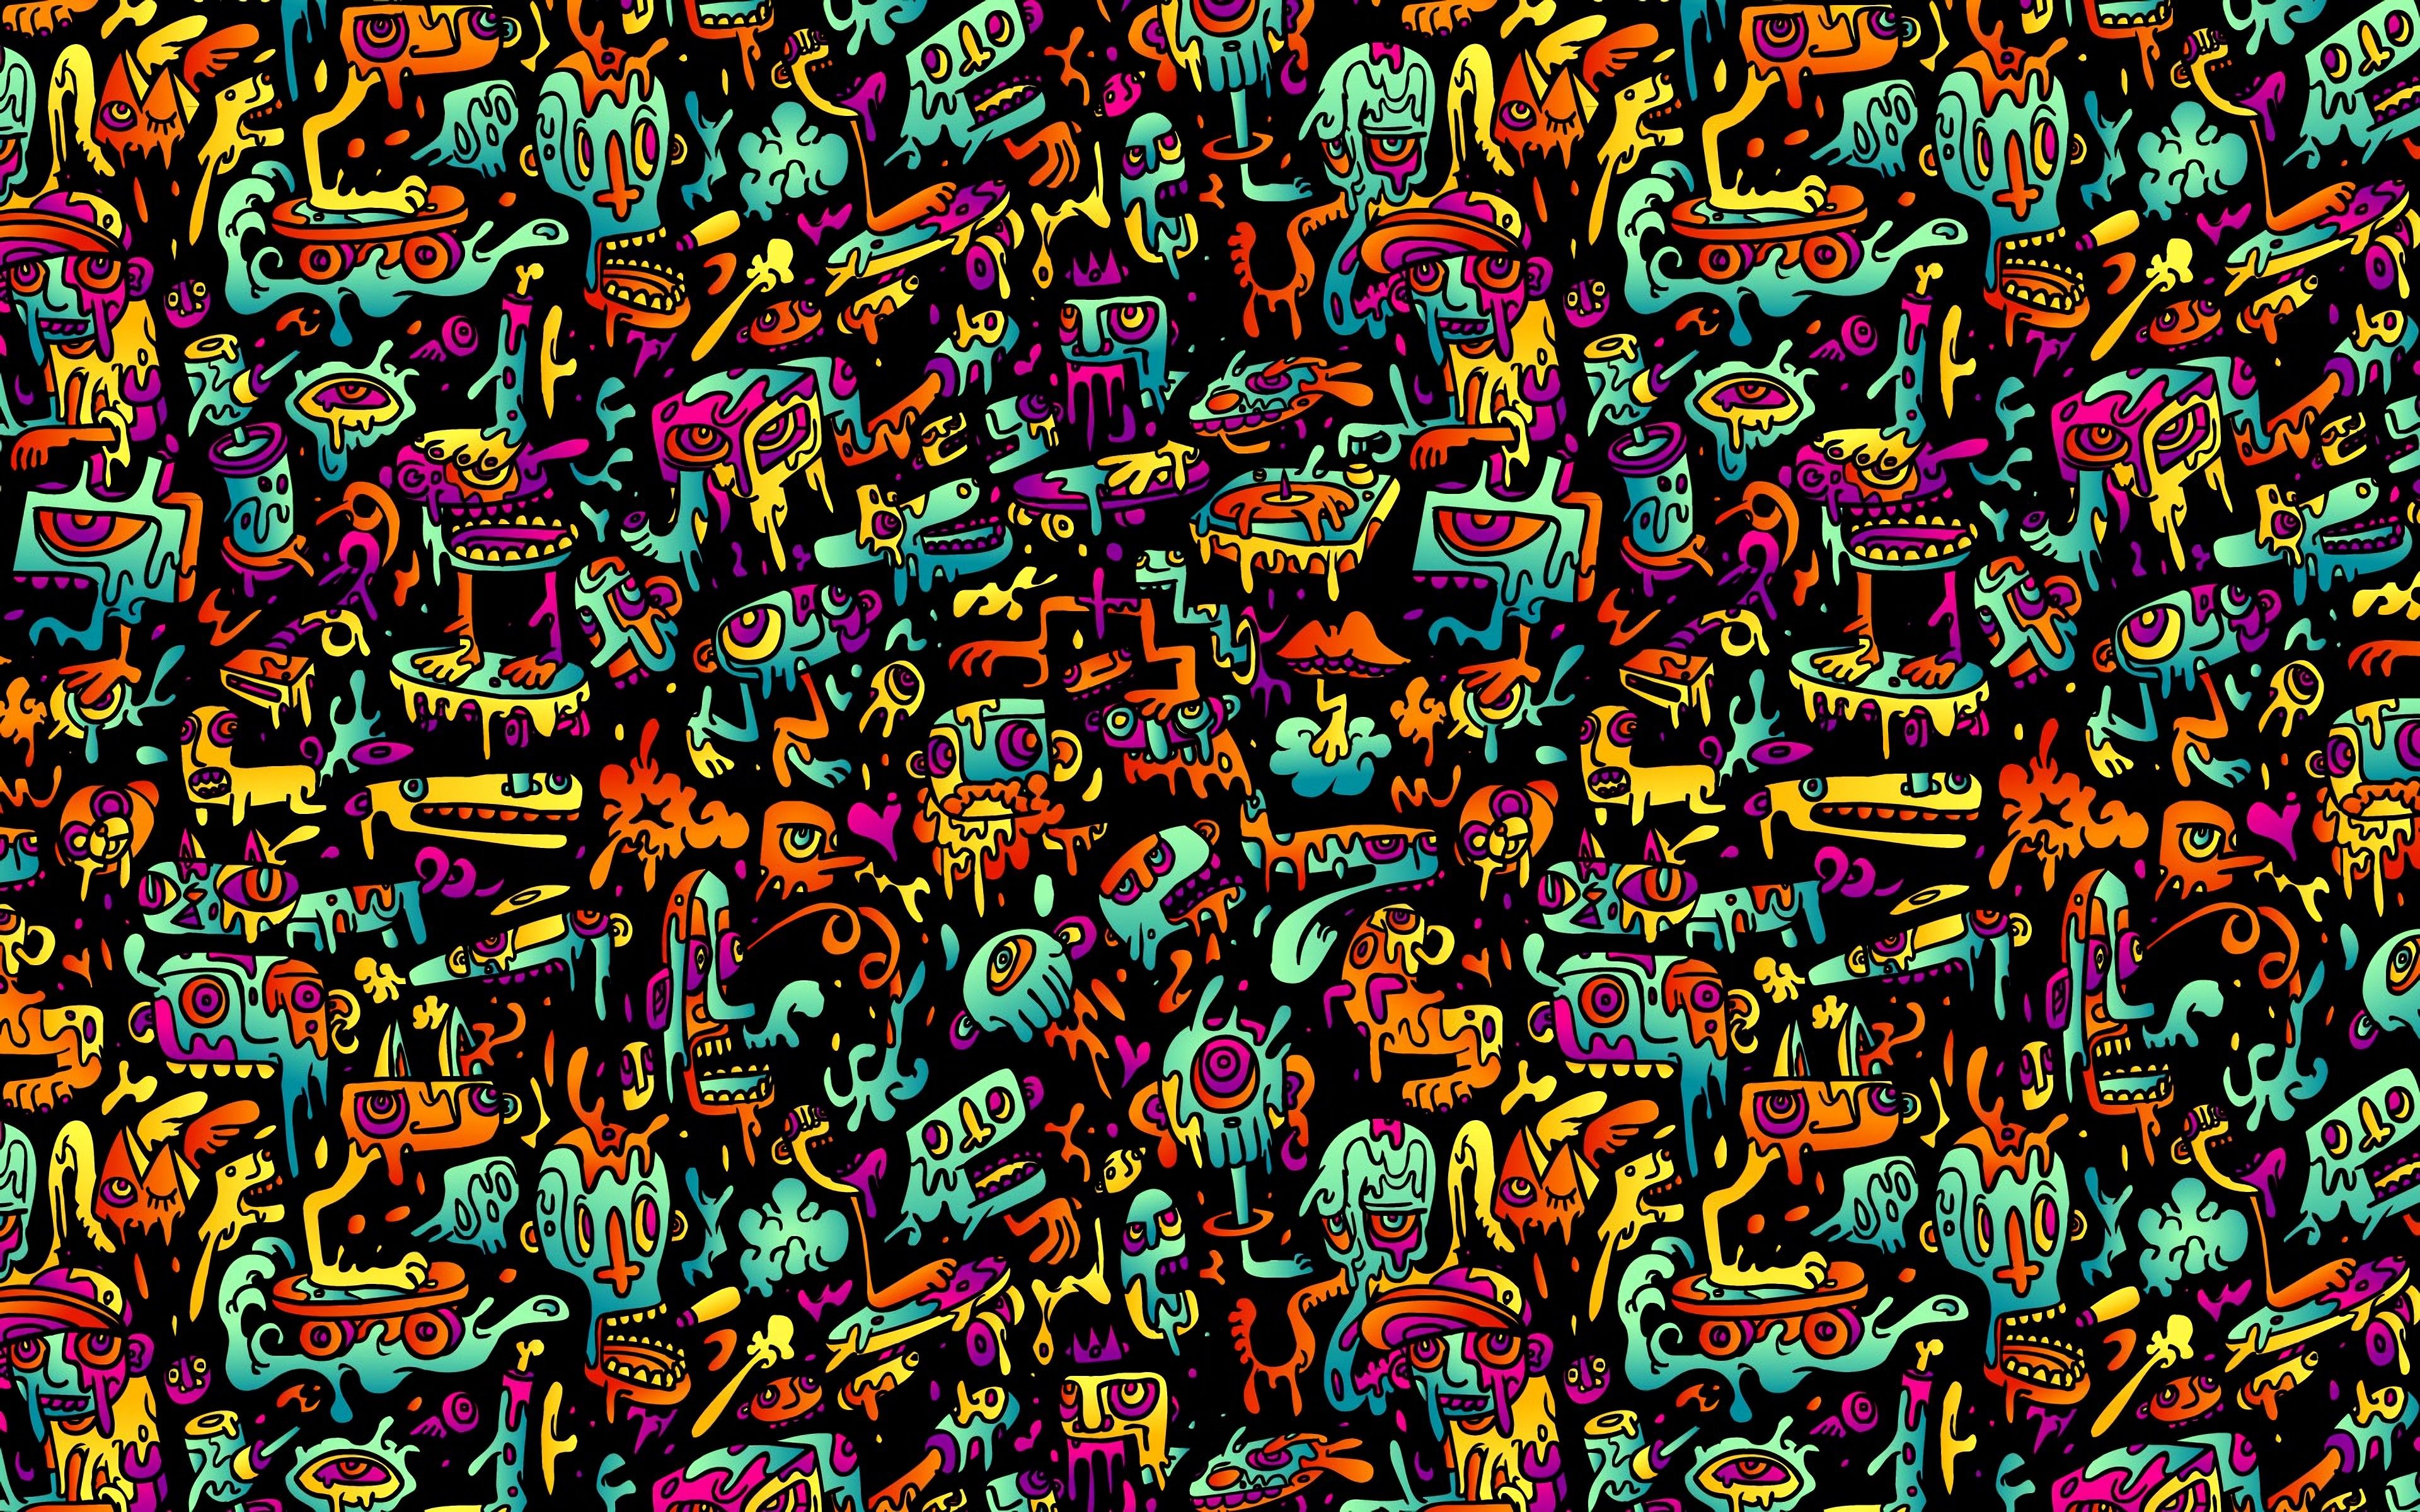 Download wallpaper 4k, cartoon monsters pattern, abstract patterns, background with monsters, creative, monsters textures, cartoon monsters background, monsters patterns for desktop with resolution 3840x2400. High Quality HD picture wallpaper